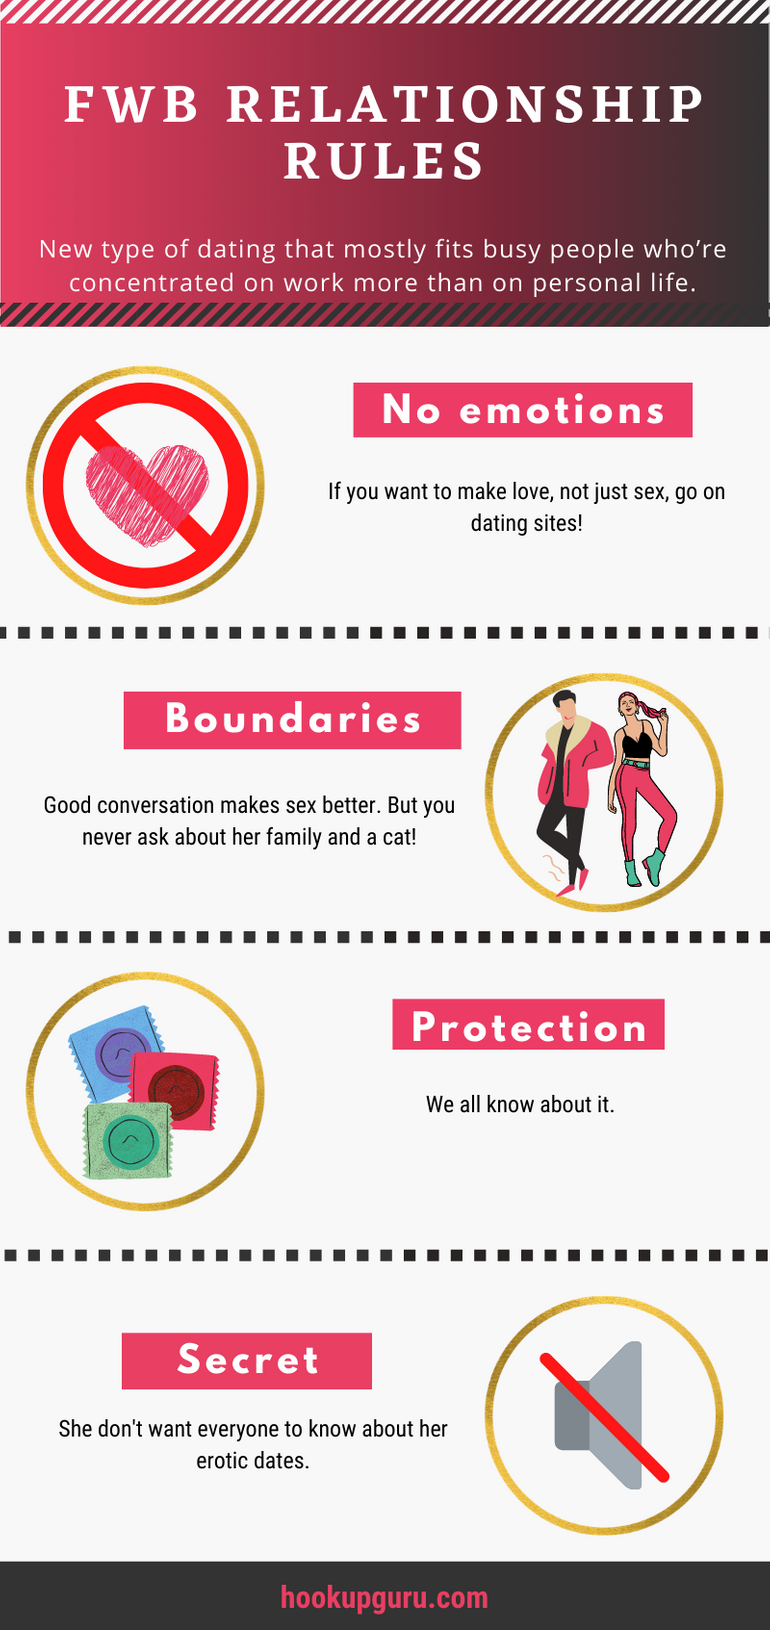 Friends With Benefits relationship rules